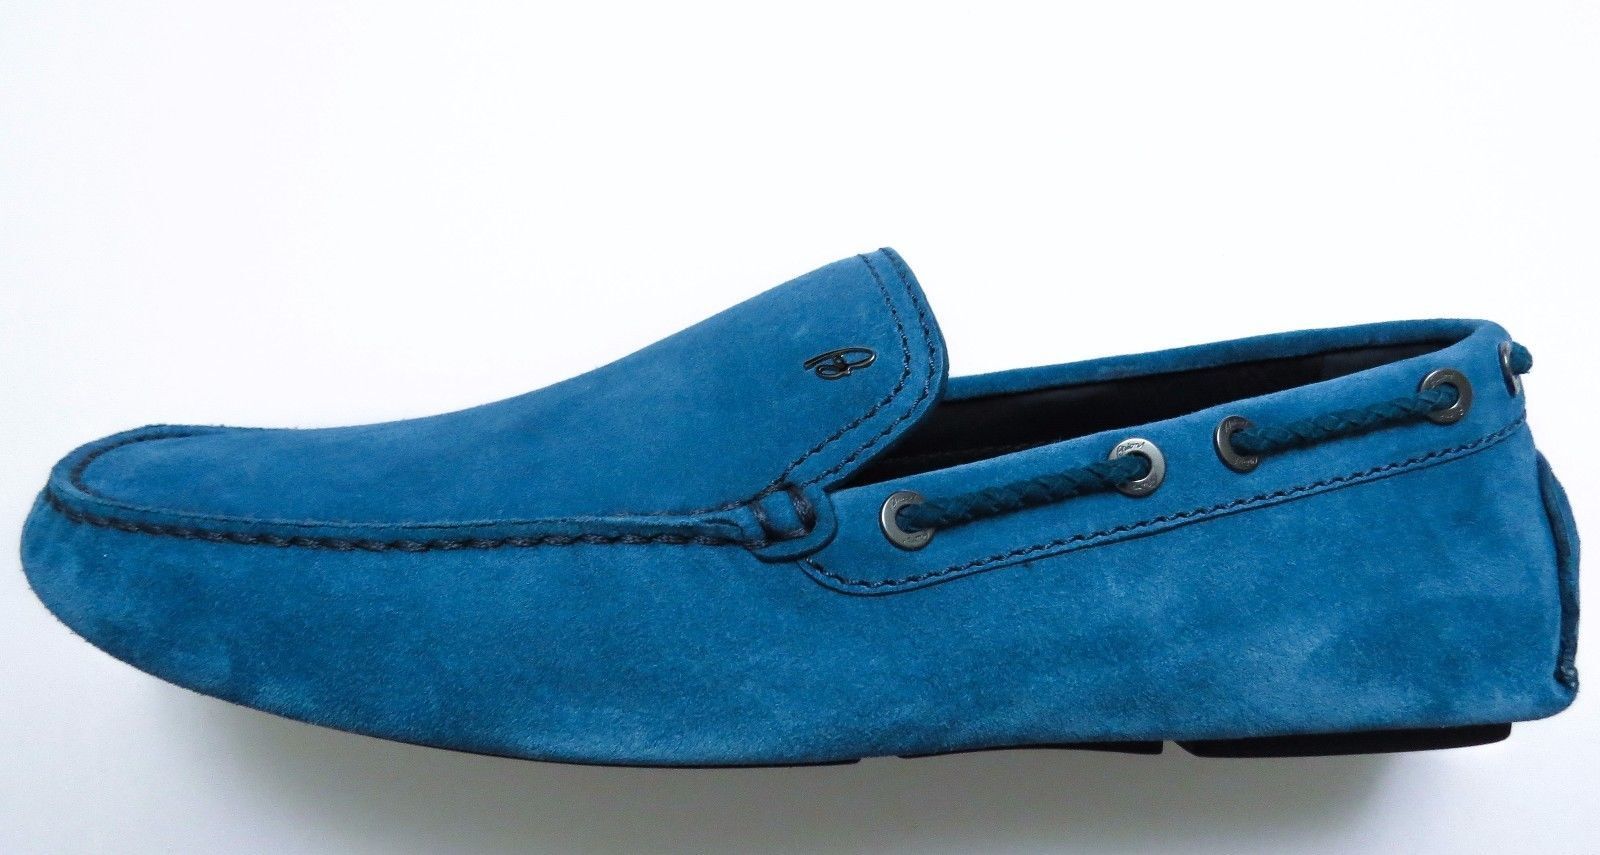 Pre-owned Brioni $750  Light Blue Suede Shoes Loafers Moccasins Size 11 Us 44 Euro 10 Uk